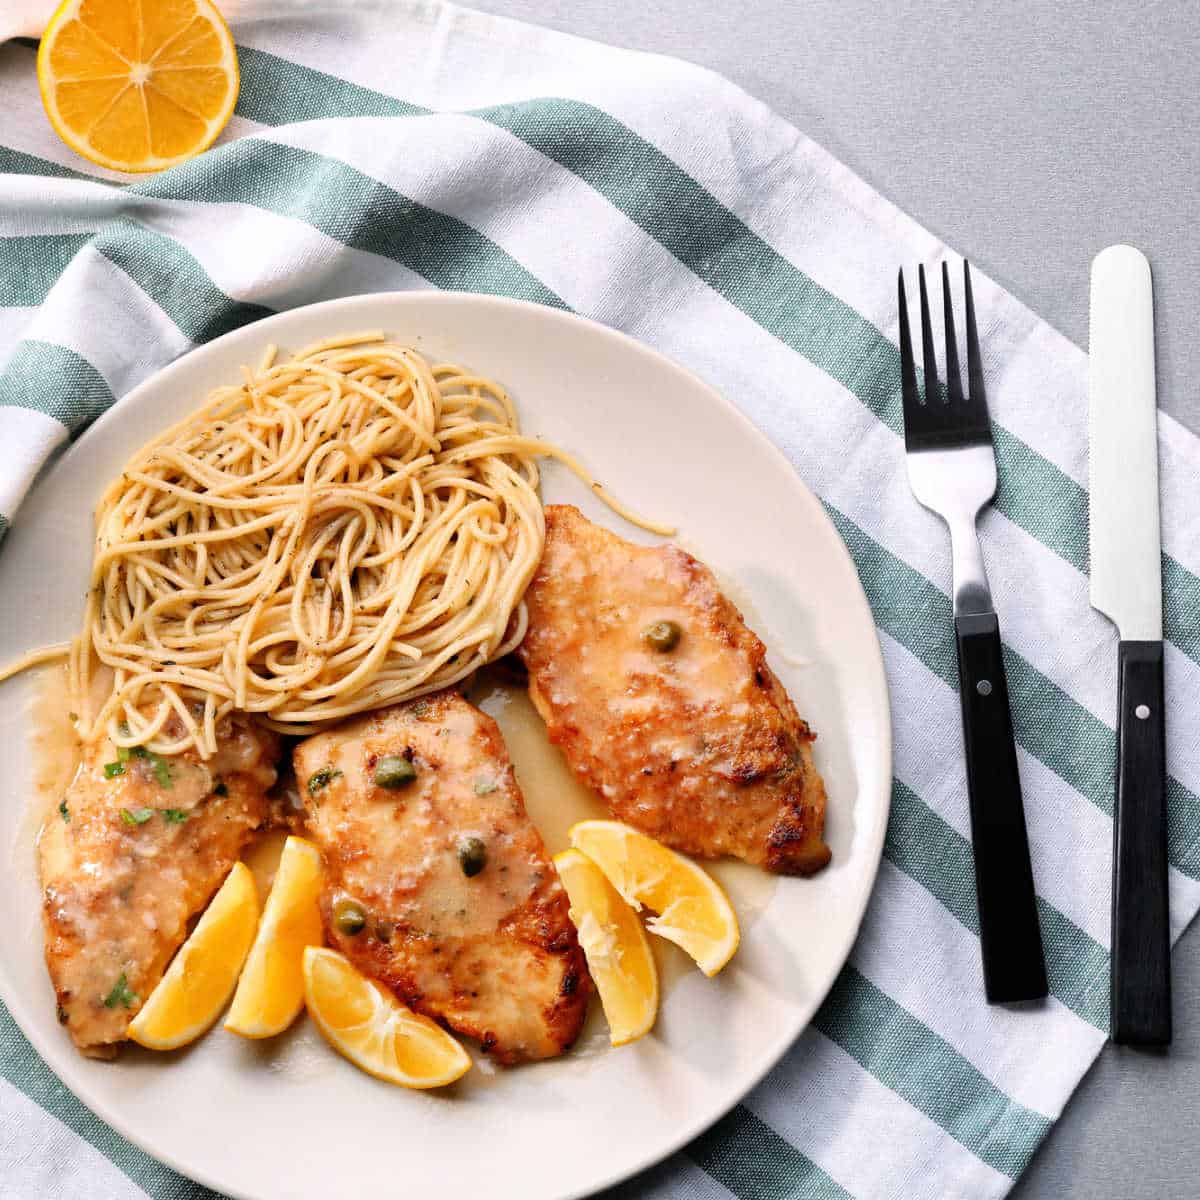 White plate holding Chicken Piccata, pasta and lemon wedges set on a white and green striped napkin. A knife and fork are to the left of the plate.